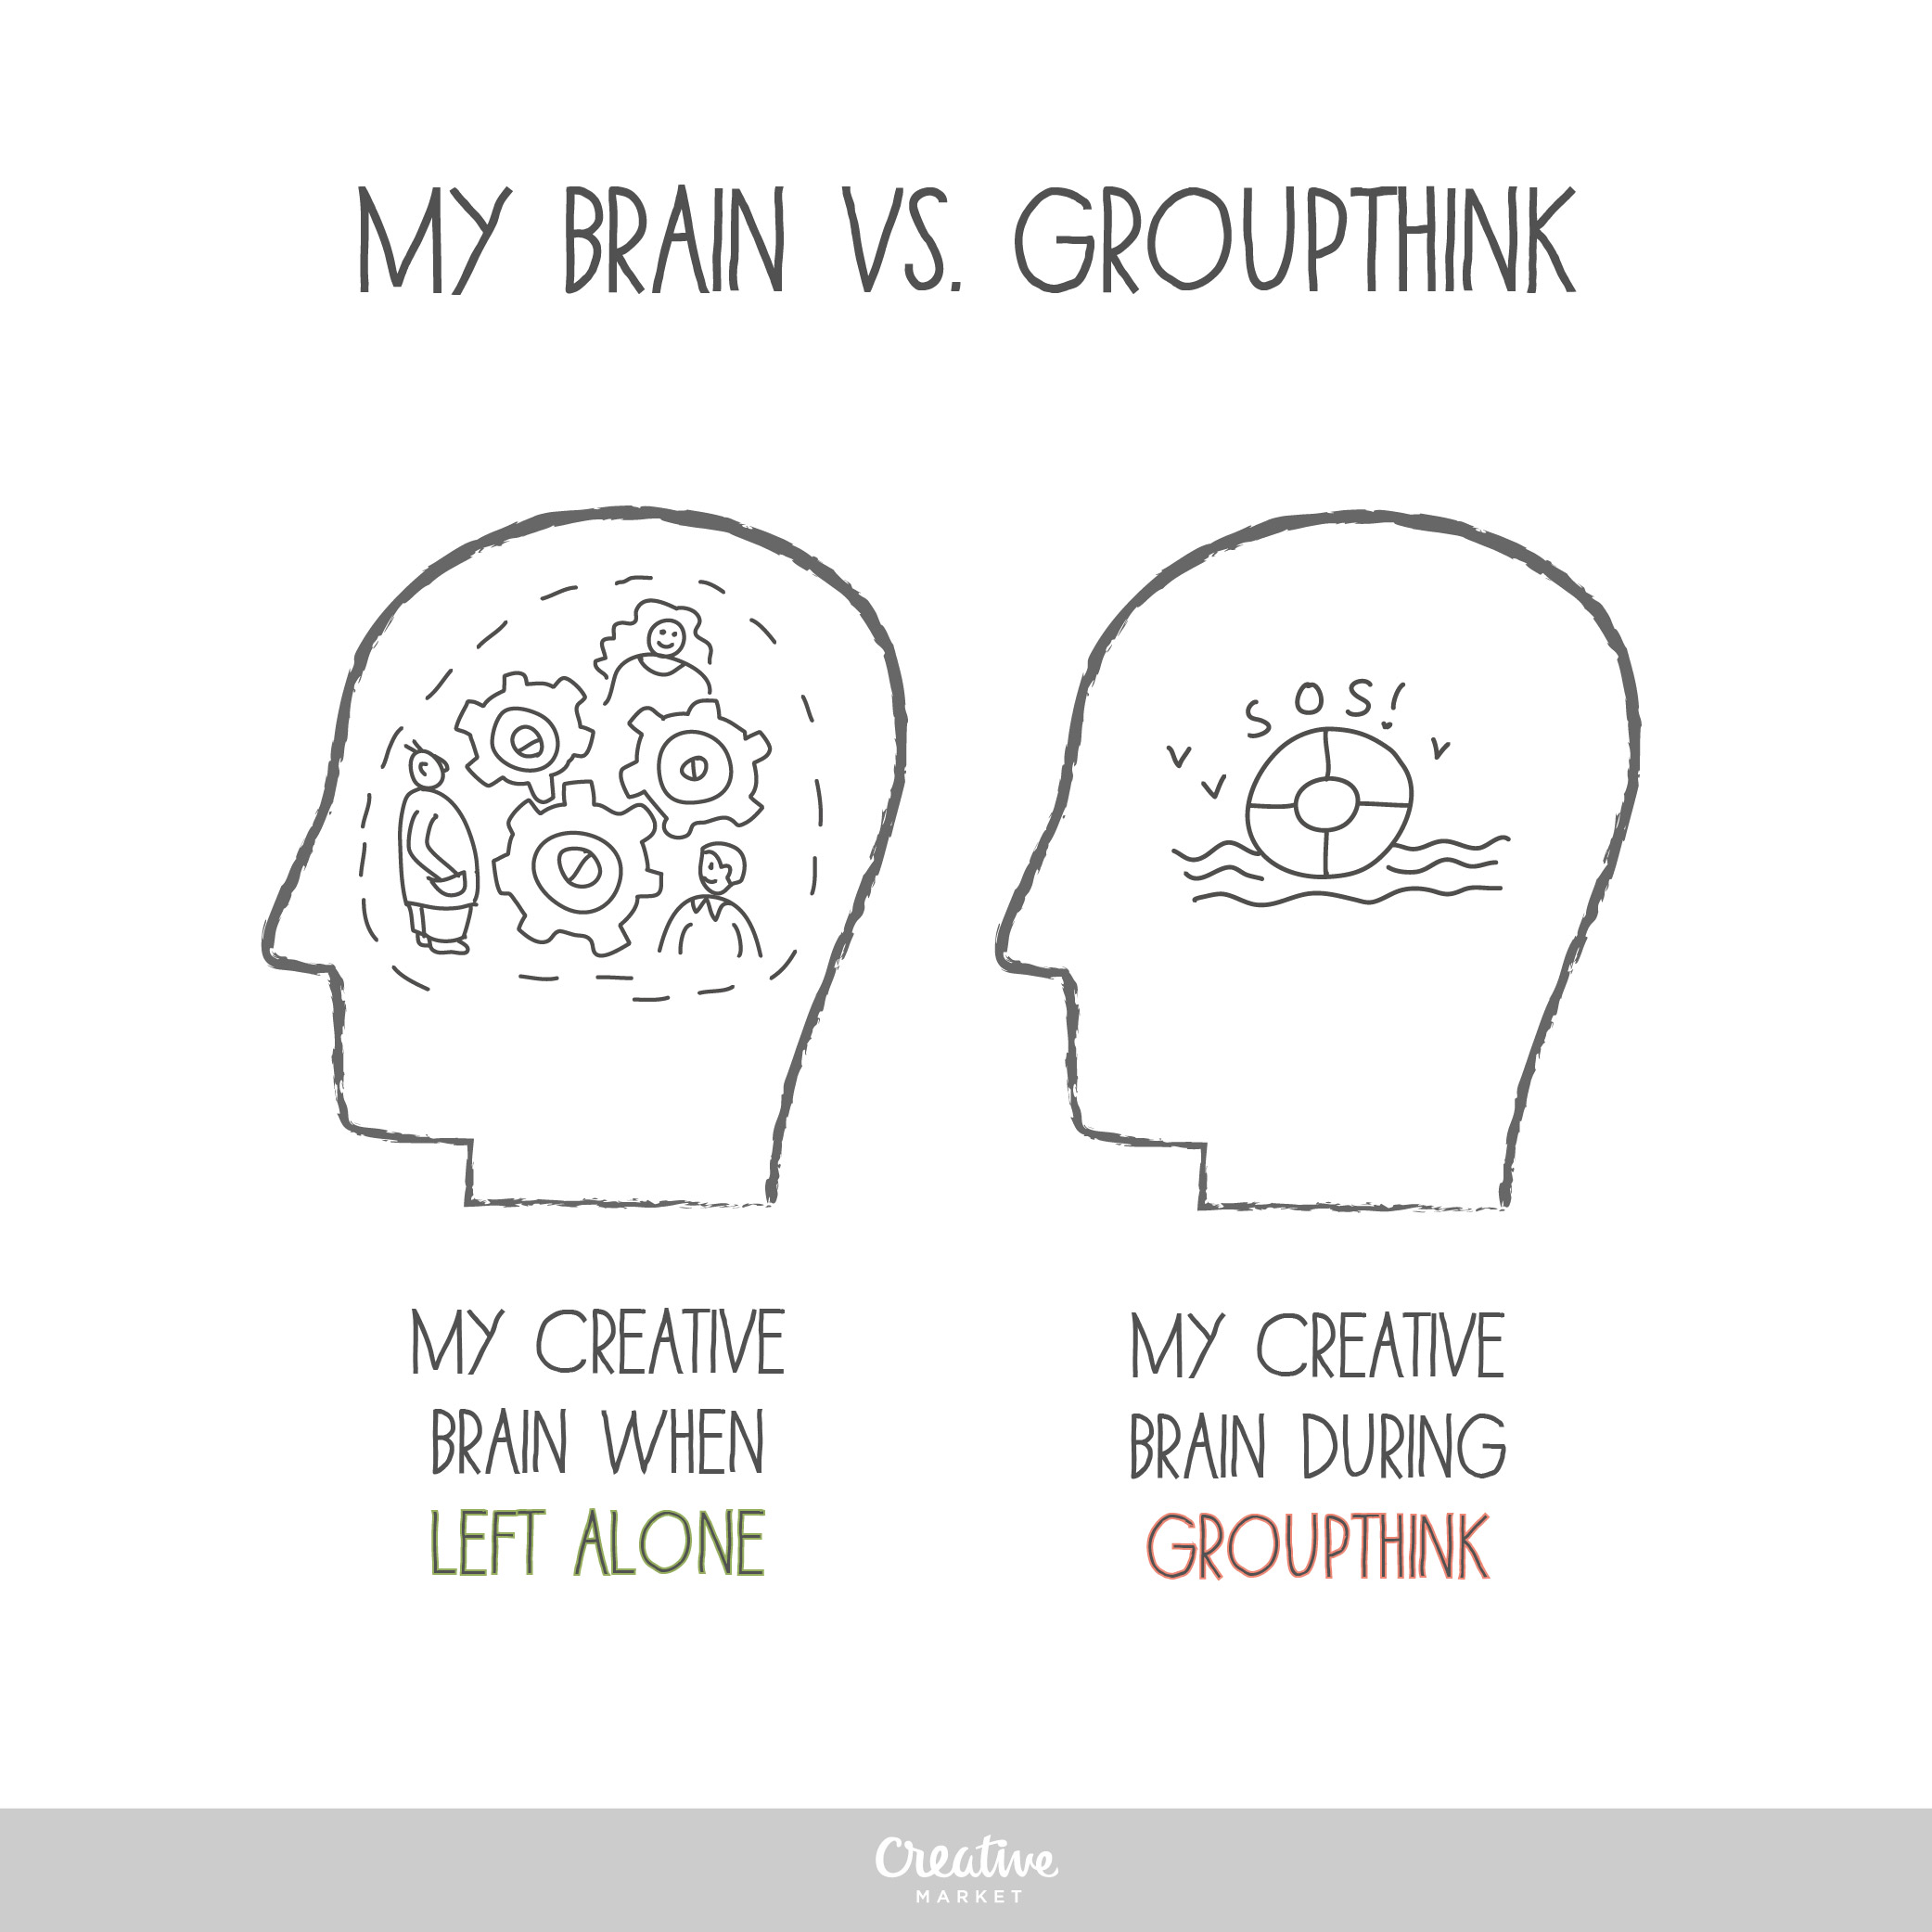 My brain when left alone vs. in a meeting, brainstorming, or groupthink.